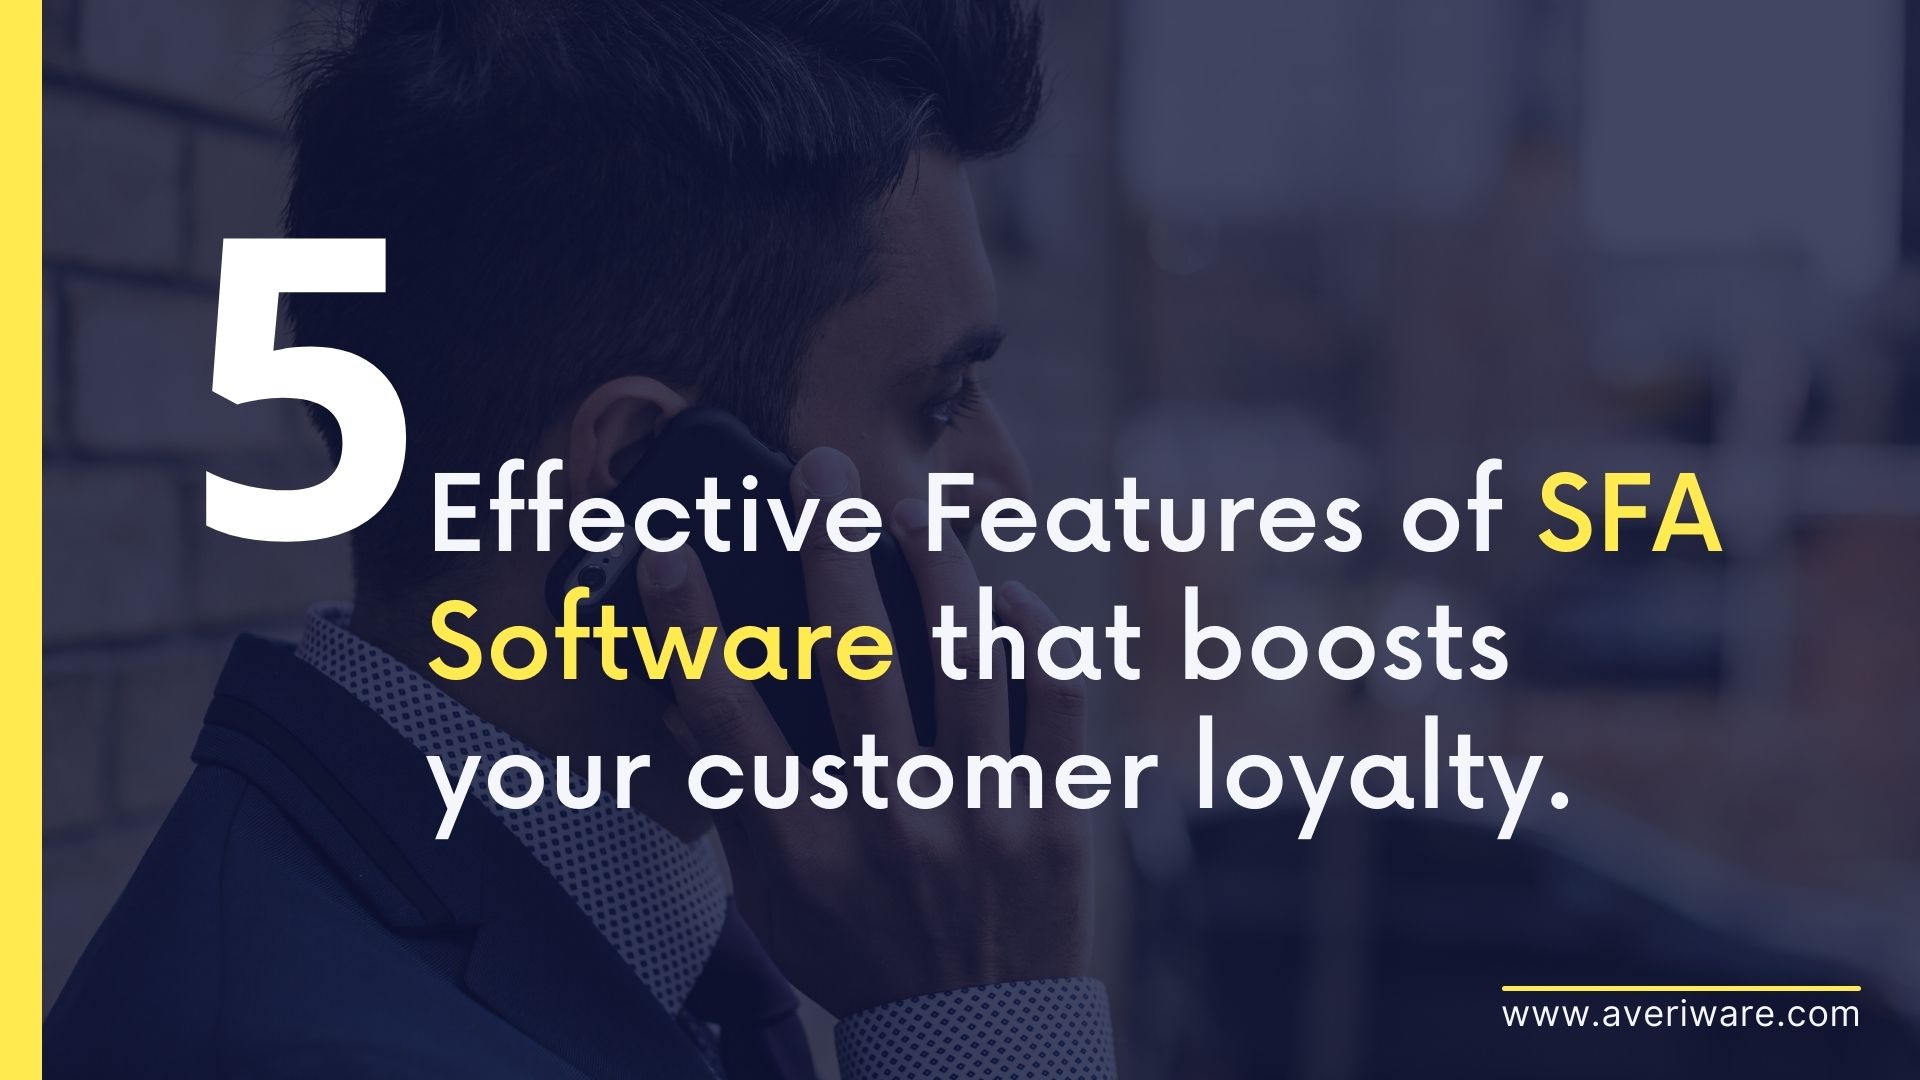 Effective-Features-of-SFA-Software-that-boosts-your-customer-loyalty